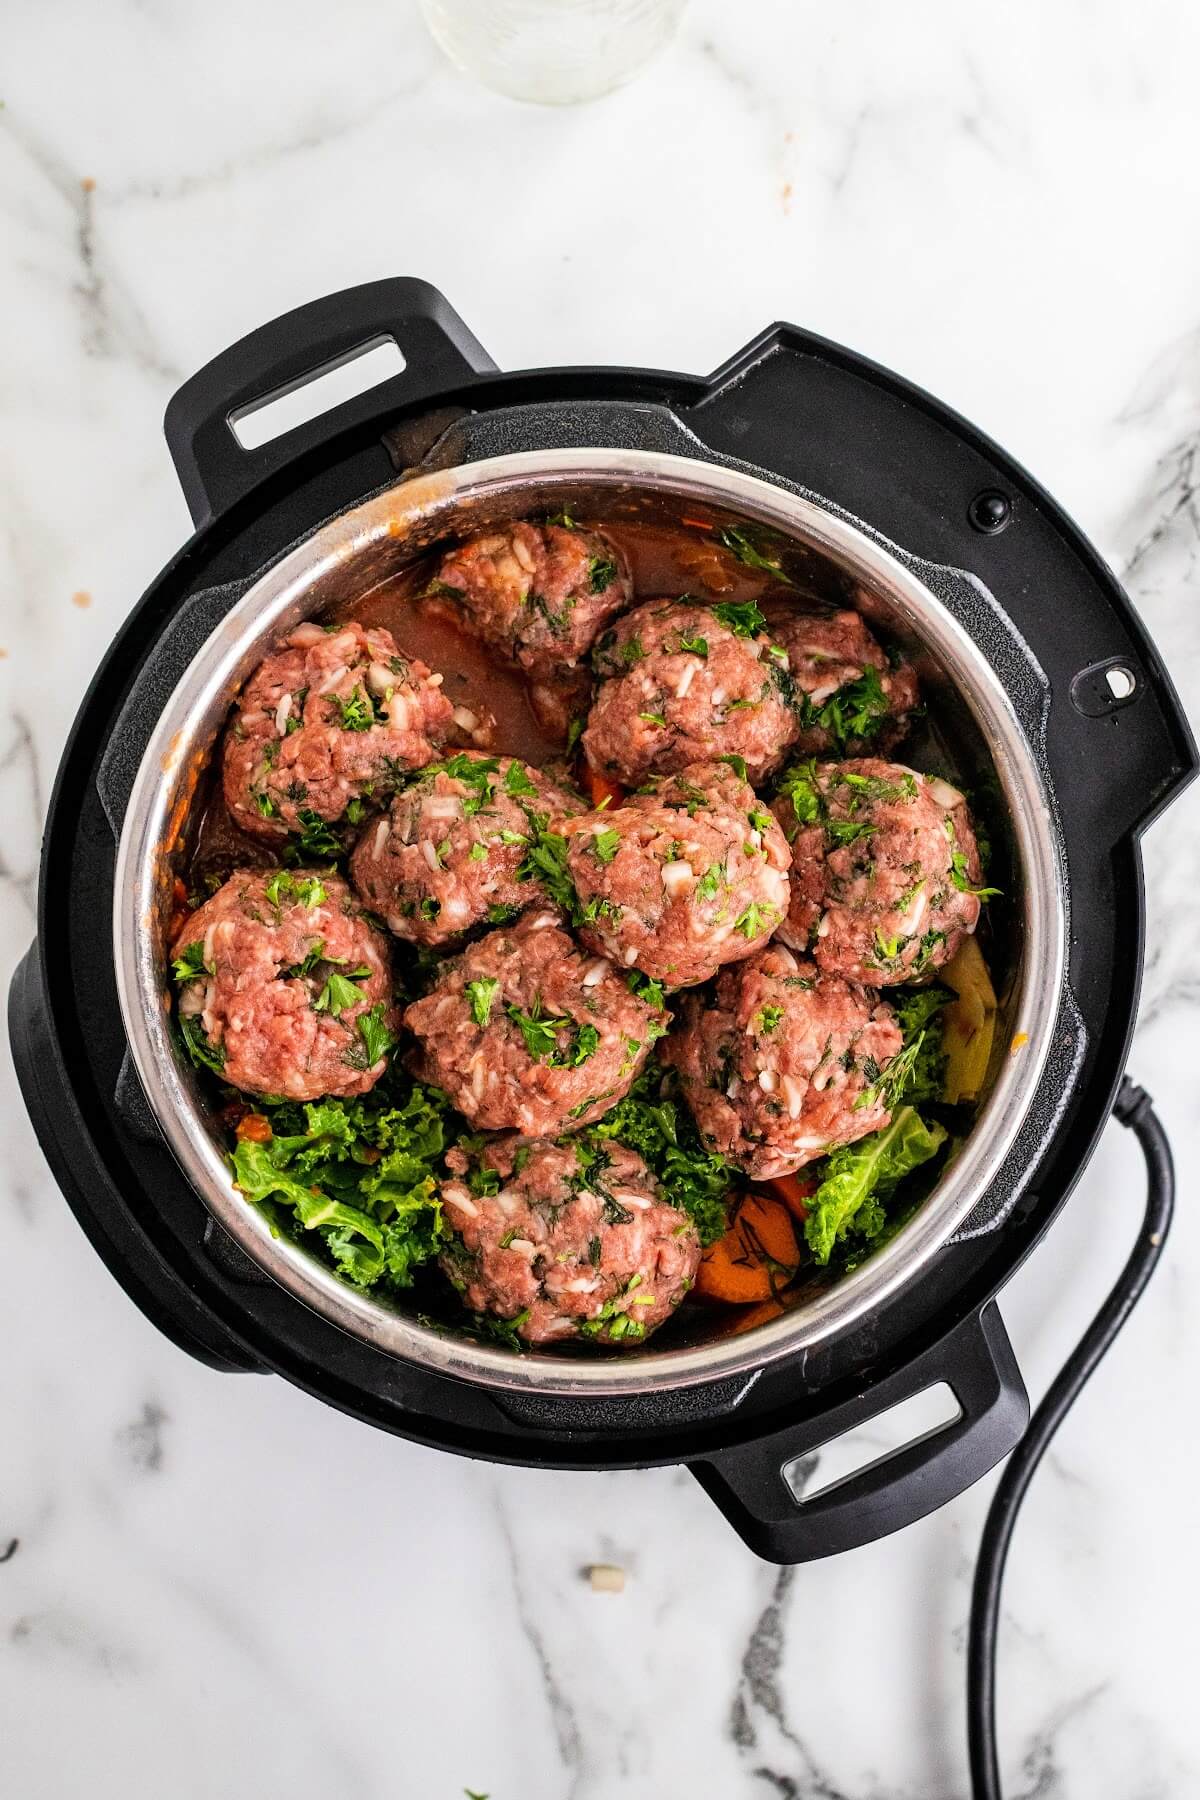 Overhead shot of an Instant Pot filled with meatballs with fresh greens sitting on top of vegetables and broth.